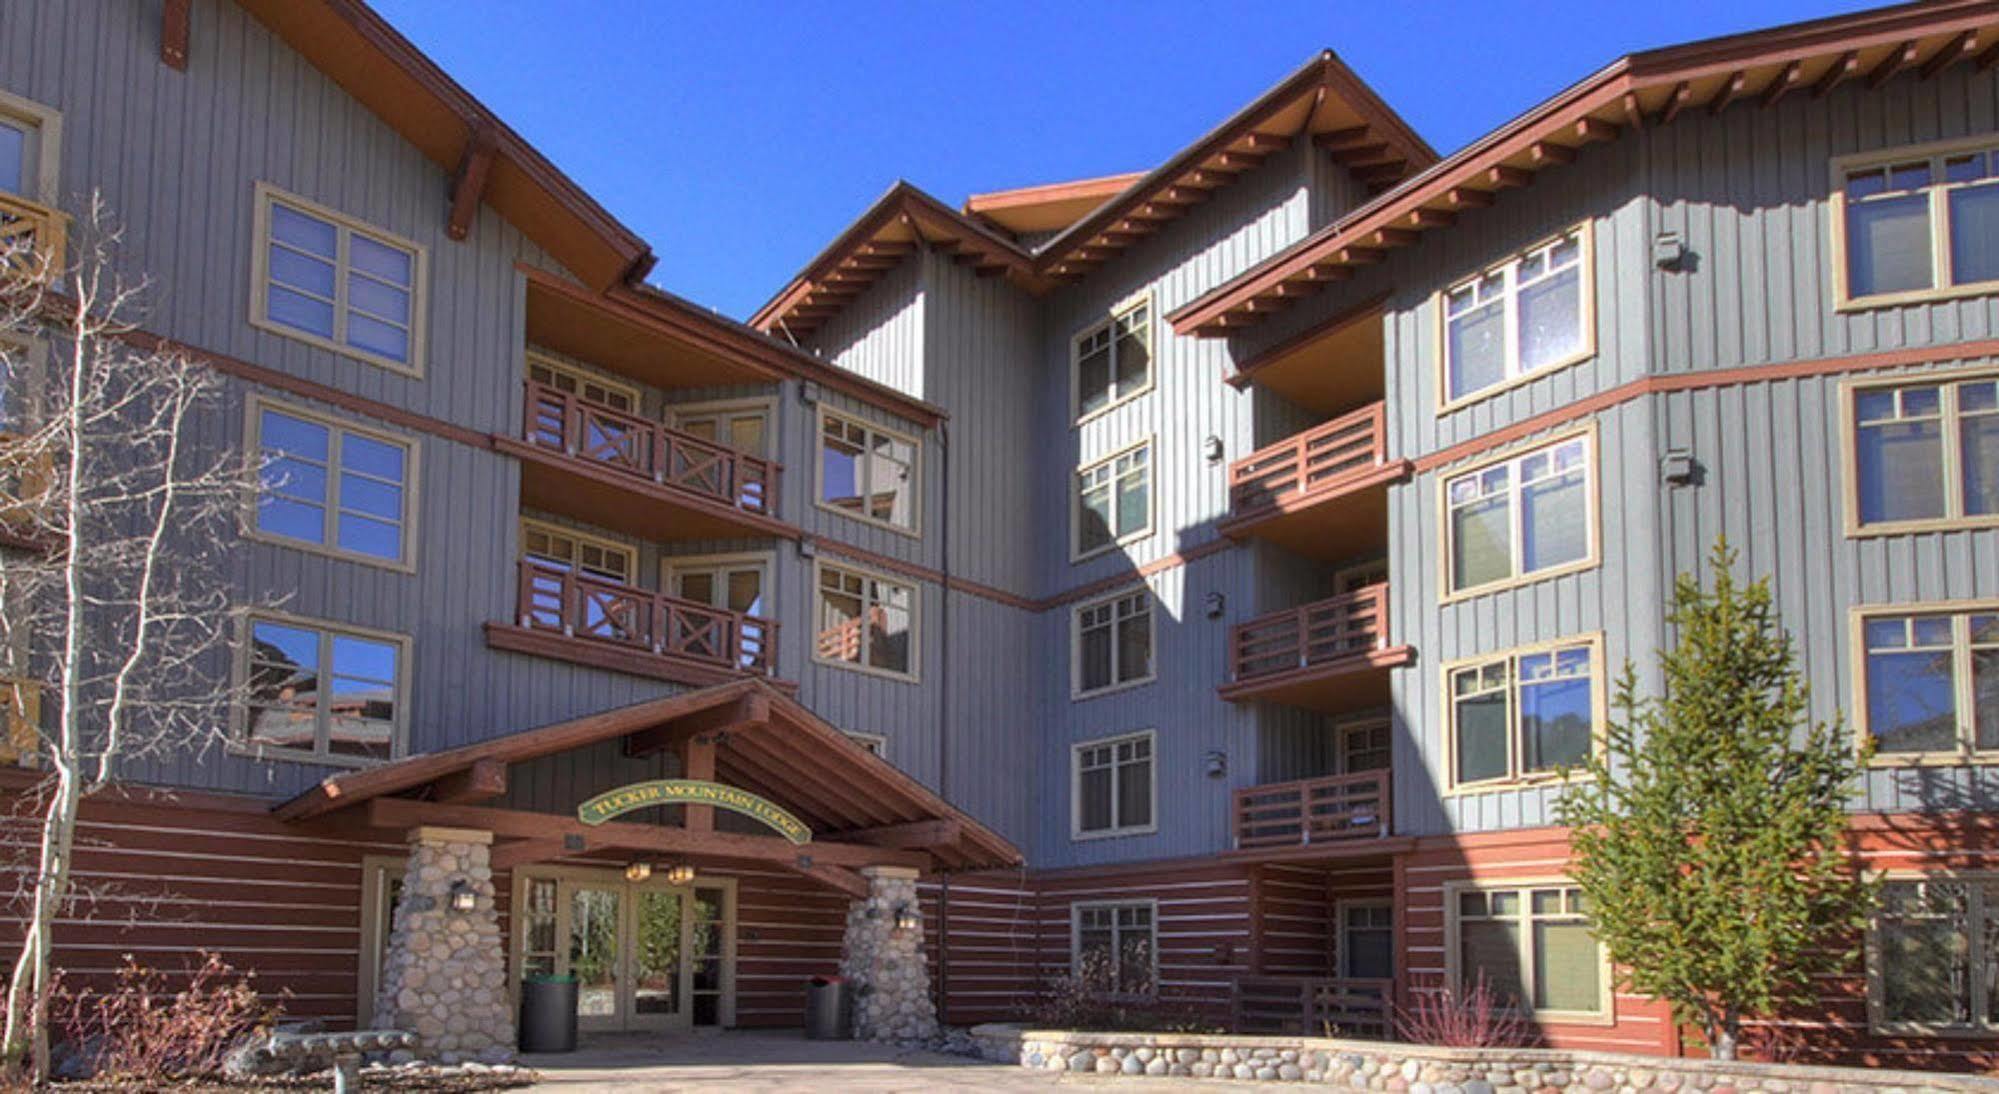 Village Square At Center Village By Copper Mountain Lodging 外观 照片